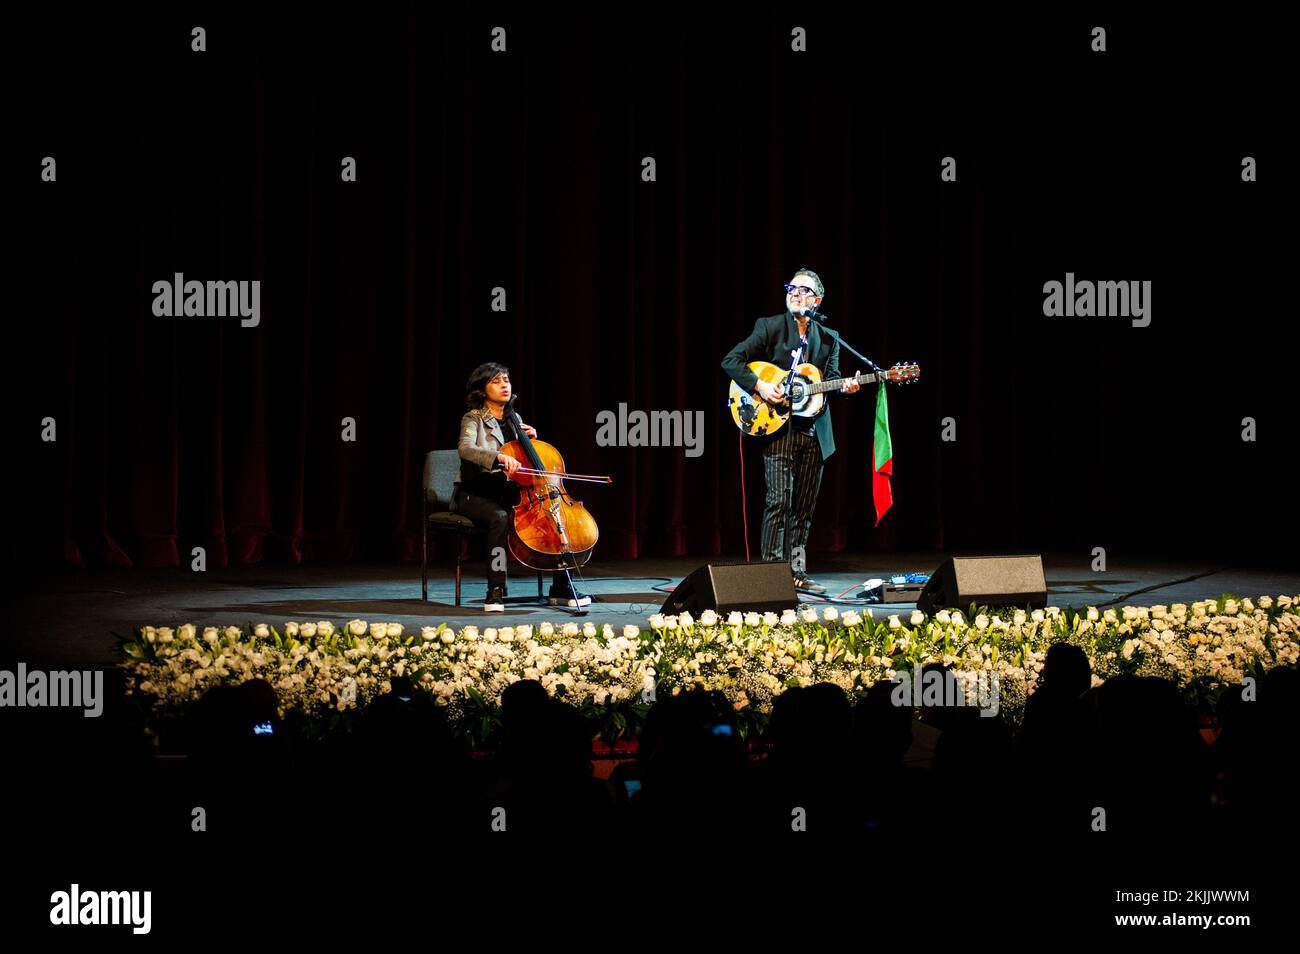 Cesar Lopez performs during the sixth anniversary of the signing of Colombia's Peace Agreement between the Colombian government and former guerrilla group FARC-EP. Photo by: Chepa Beltran/Long Visual Press Credit: Long Visual Press/Alamy Live News Stock Photo